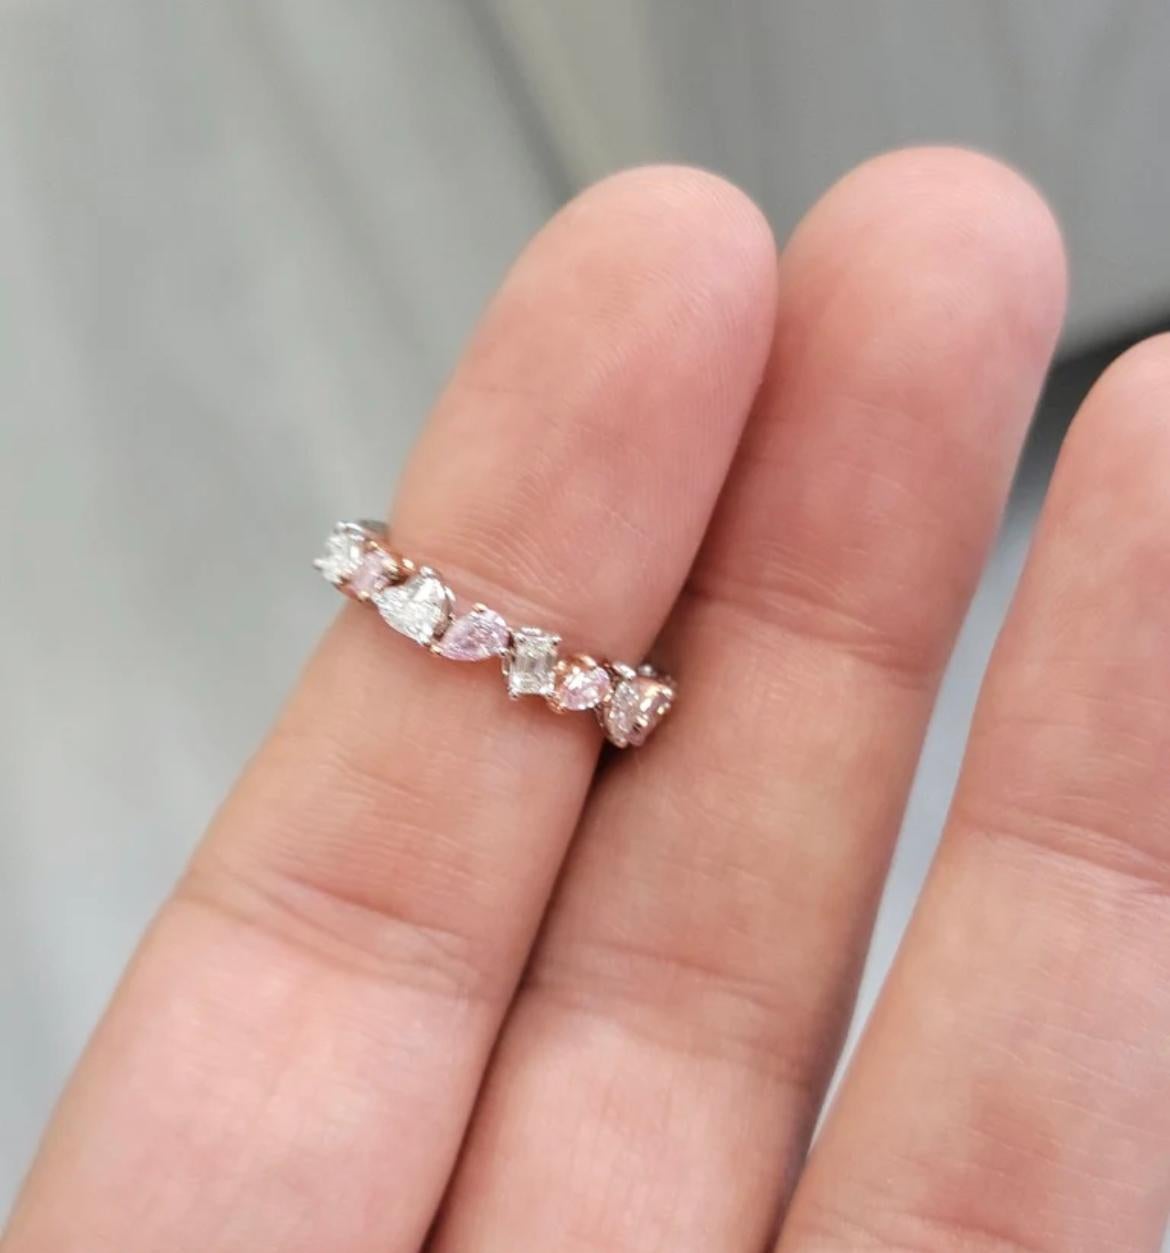 - 0.91ct total weight
perfect to add to your stack or wear alone
- Super sweet in color perfect for everyday where
- Made in 18K White Gold
- Size 6 
- Can be sized by request
